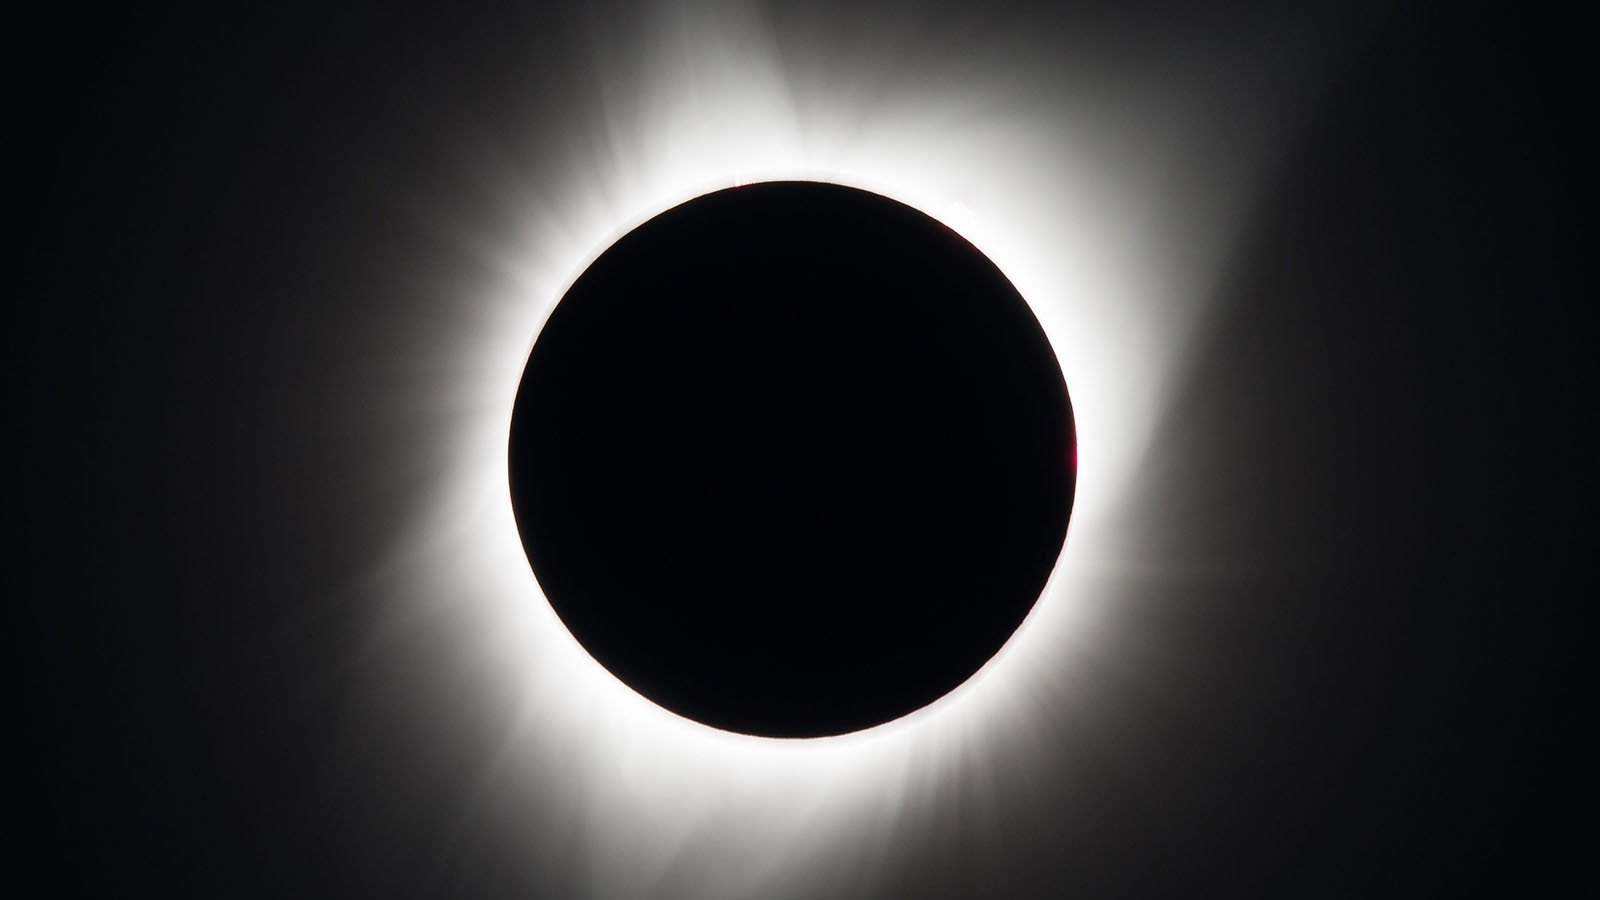 A total solar eclipse is shown as light rays emit from a black circle against a black sky.